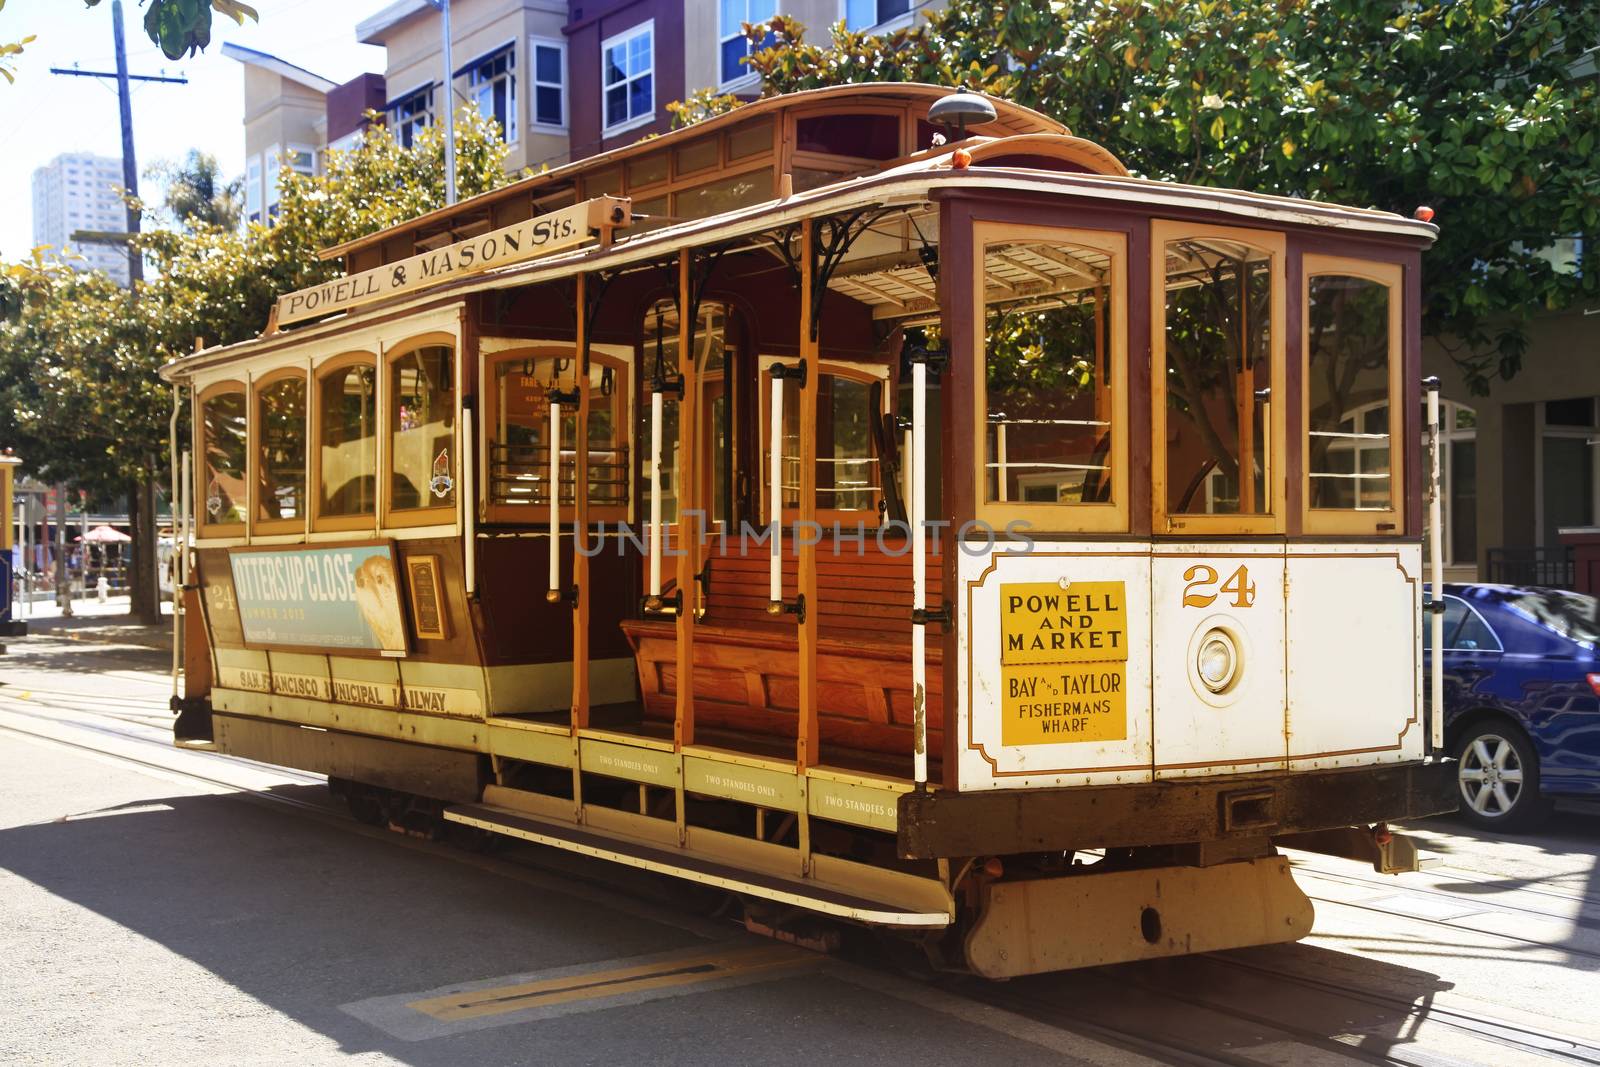 SAN FRANCISCO, CA, USA - AUGUST 17, 2013: Passengers ride in a cable car on August 17, 2013 in San Francisco. It is the most popular way to get around the City of San Fransisco which is in service since 1873.